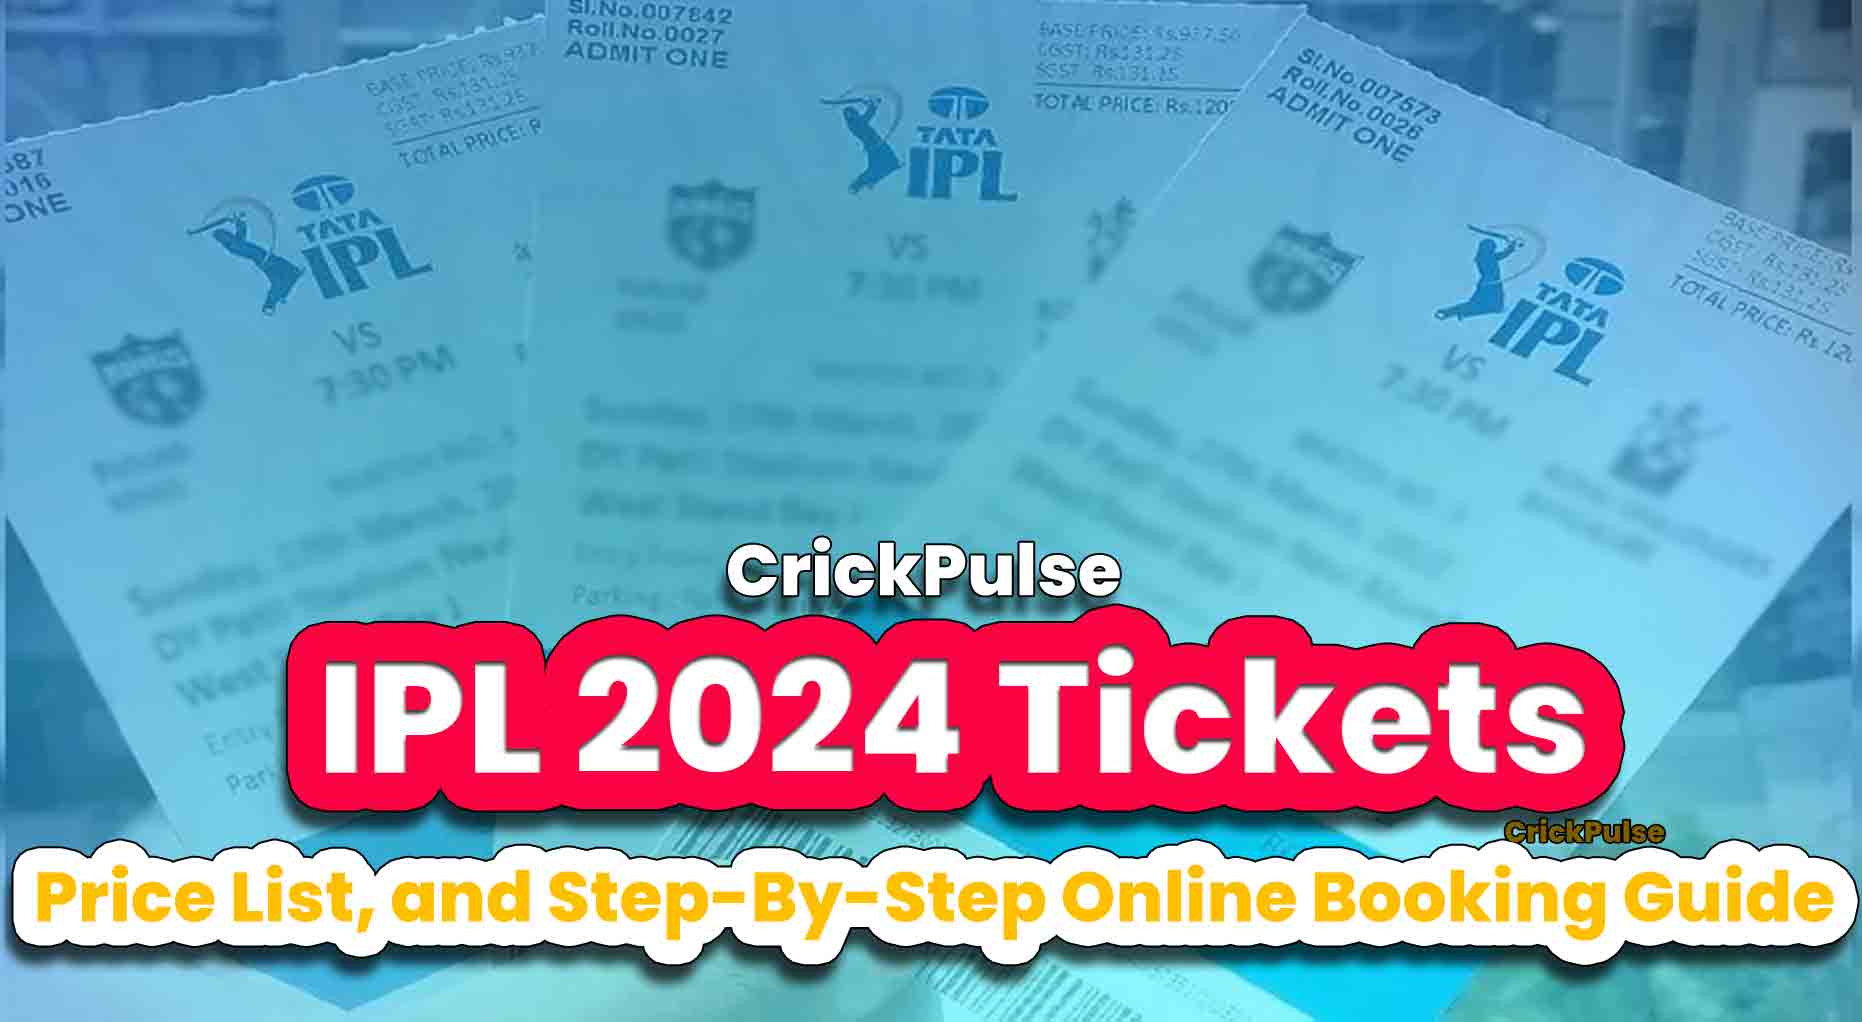 IPL 2024 Tickets, Price, and Complete Online Booking Guide